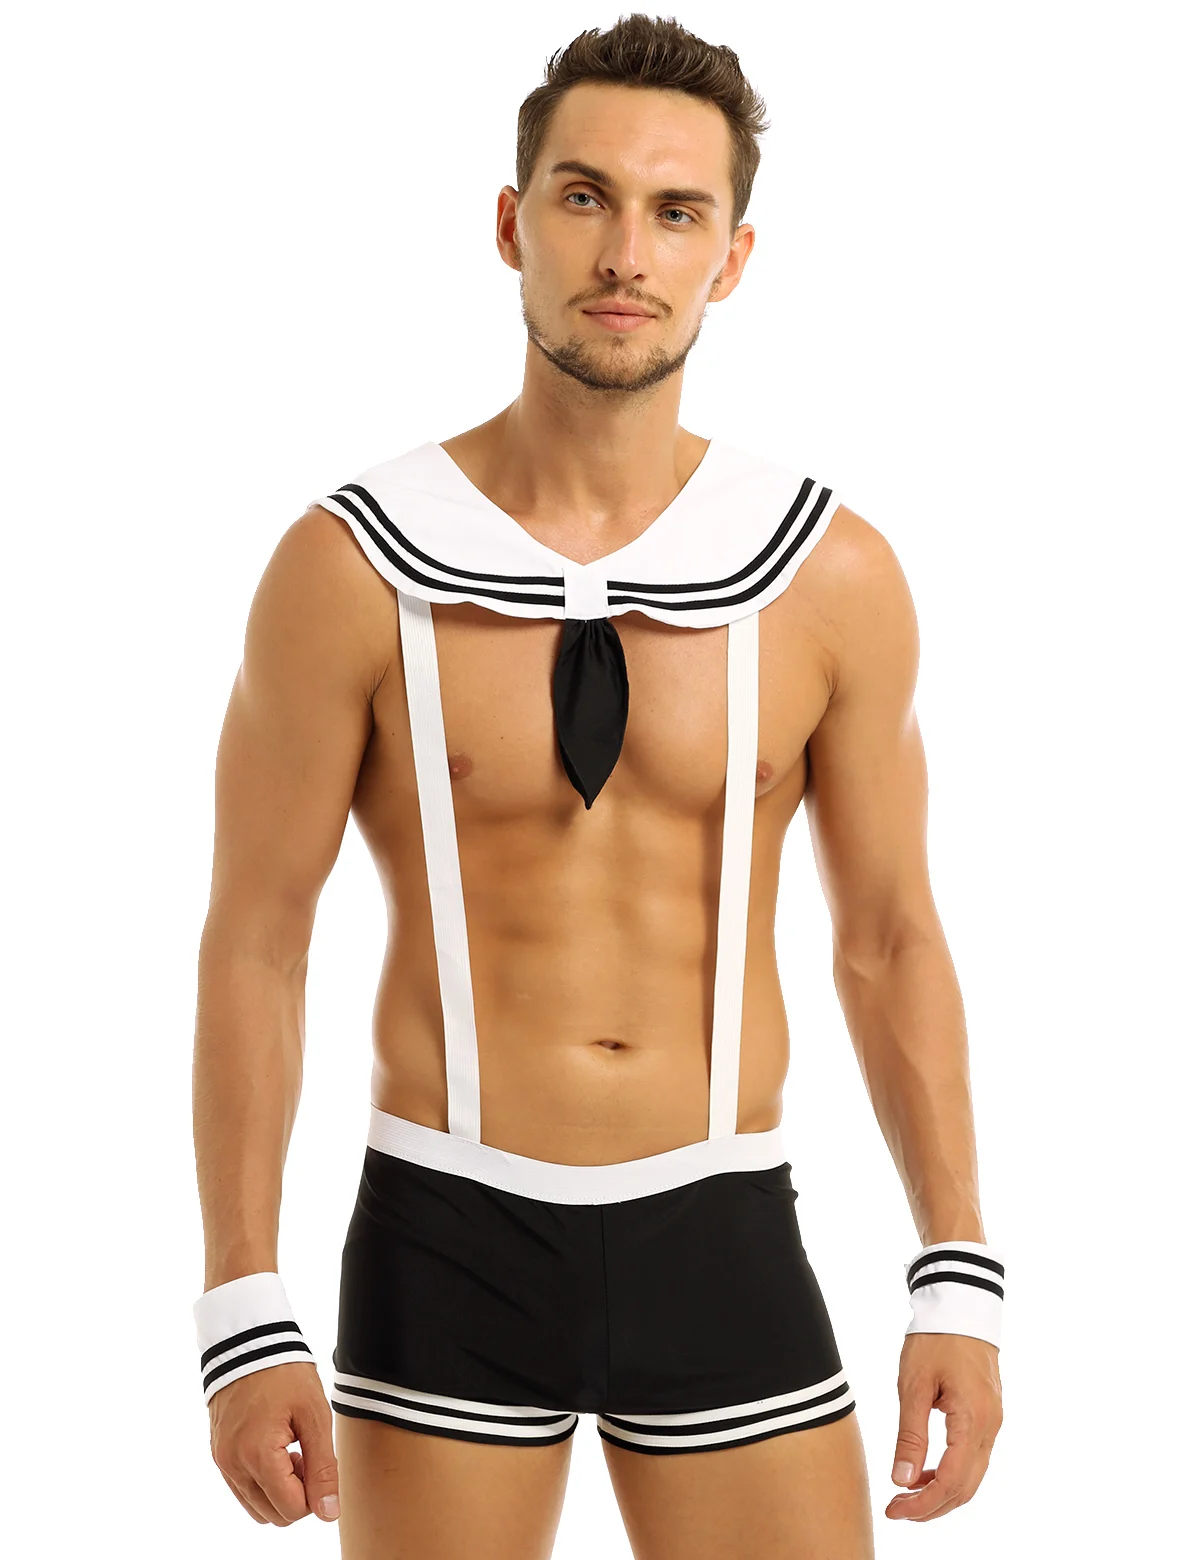 

Men Sailor Cosplay Costume Underwear Set Elastic Suspenders Boxer Shorts with Collar and Cuffs Male Gay Erotic Sexy Lingerie Set